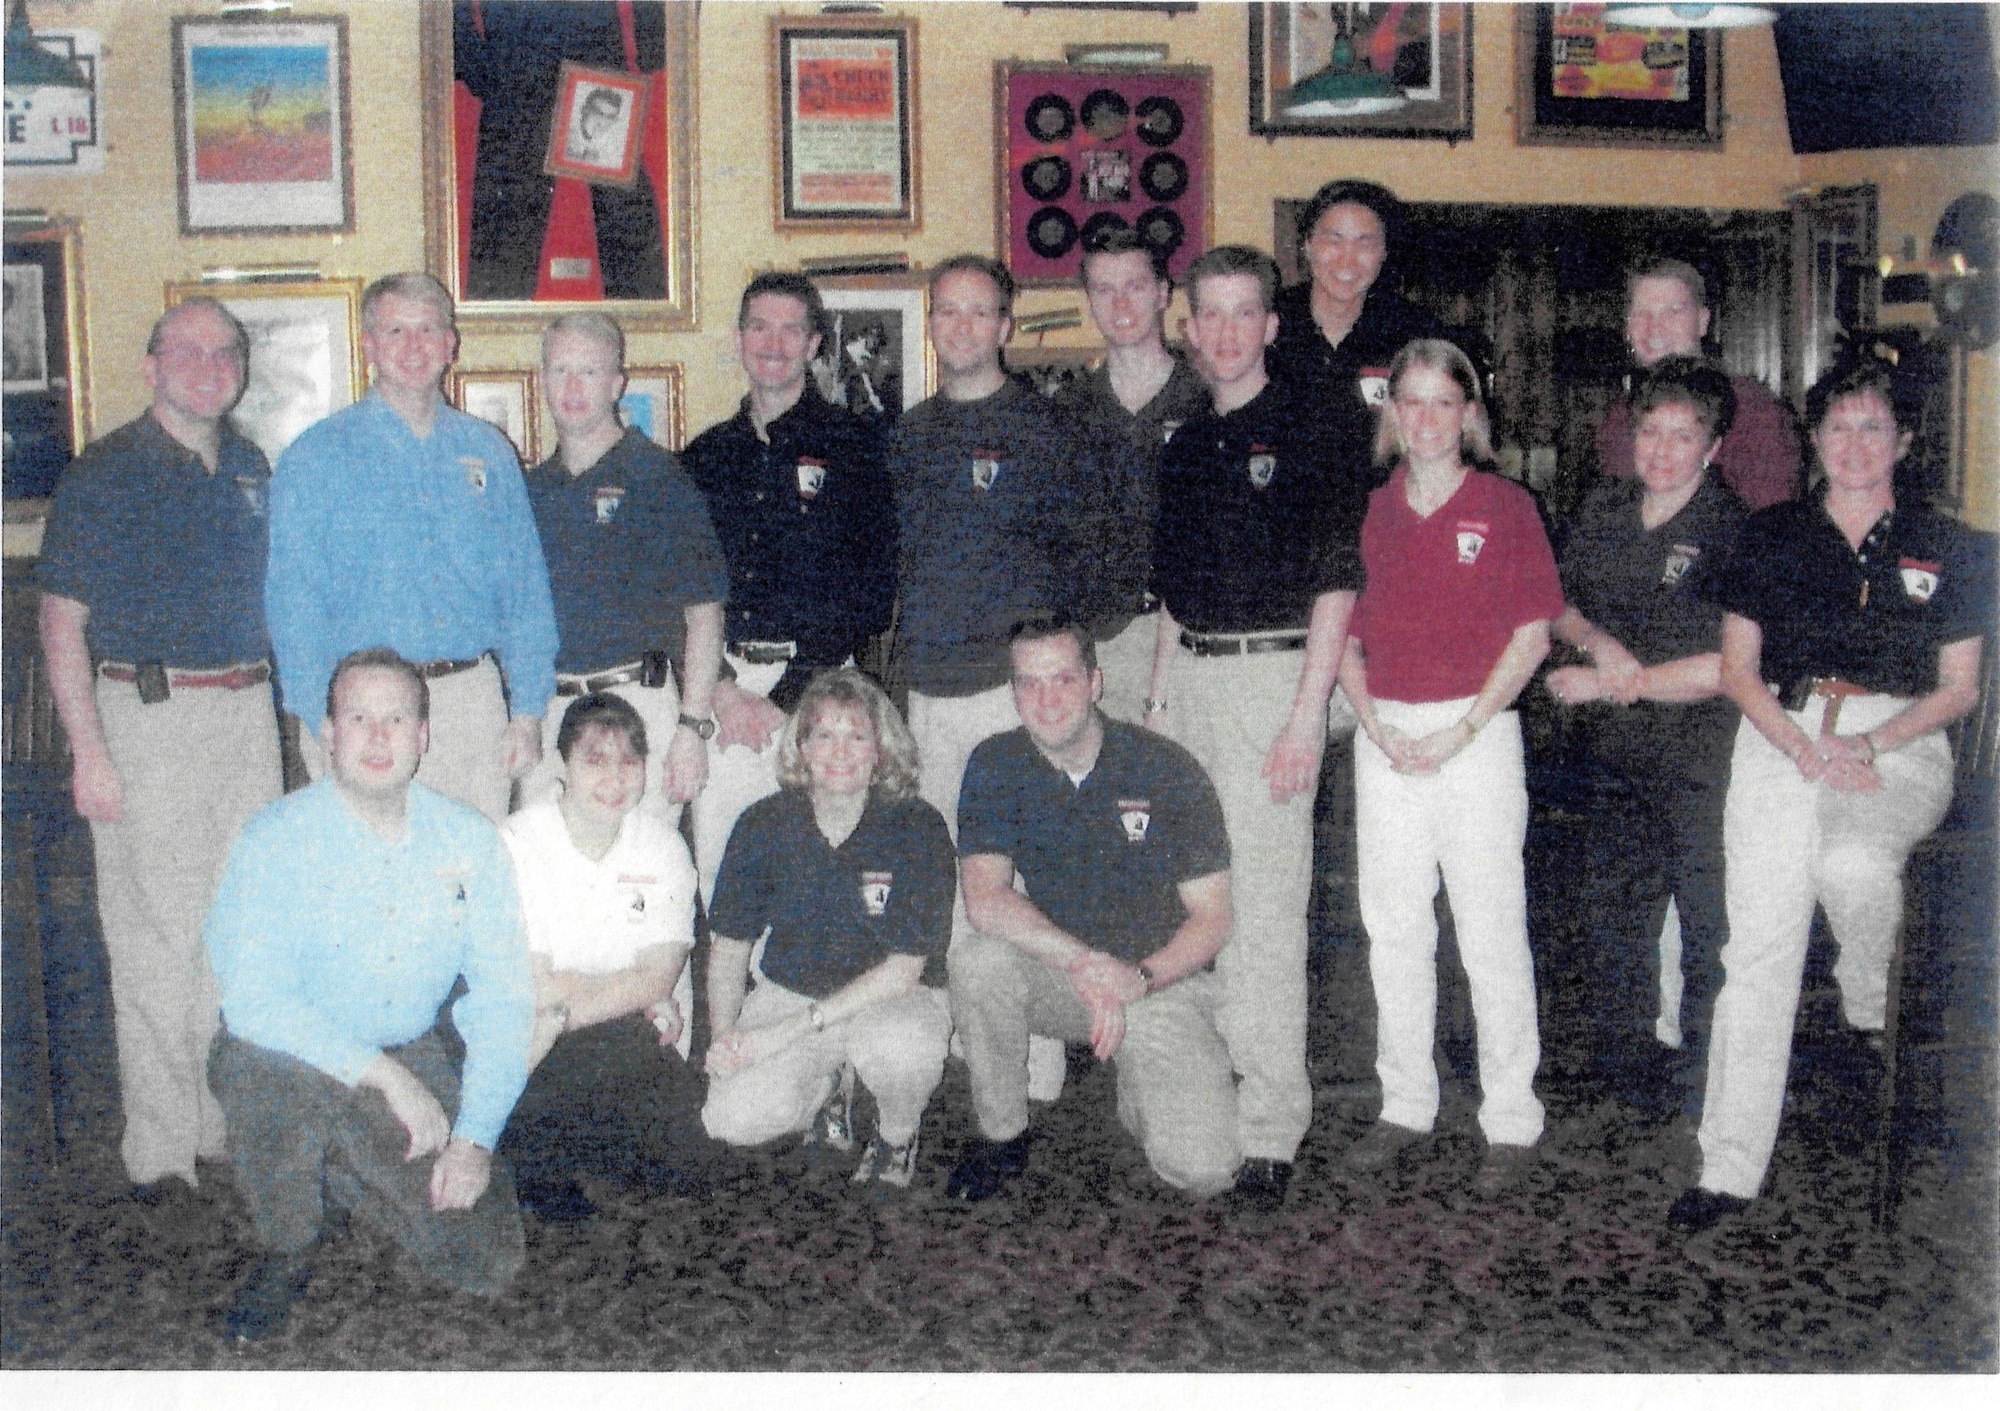 In February, 2002, all OSI Forensic Science Consultants gathered for the annual Forensic Science Program liaison event at the American Academy of Forensic Sciences meeting in Atlanta, Ga. By 2009, enlisted special agents were admitted into the program, and in 2010, civilians rounded out the team. Today, OSI boasts 20 FSCs serving the command worldwide. 

Back row, left to right, Lt. Col. (Retired) Bob Hunkeler, Brig. Gen., then Capt. Terry Bullard, SA Brian Clark, Maj. (Retired) Keith Cook, Lt. Col. (Retired) Louis Perret, Lt. Col. (Retired) Chris Konecny, Lt. Col. (Retired) David Lindsay, Maj. Yun Cerana, Col. (Retired) Renae Hilton, Col. Shan Nuckols, Dr. Linda Estes, and Lt. Col. (Retired) Dr. Nancy Slicner.

Front Row, left to right, Lt. Col. (Retired) SES and Dr. Nate Galbreath, SA Julie Lecea, Lt. Col. (Retired) Cherryl Boyette and SA Russ Strasser. (Courtesy photo)